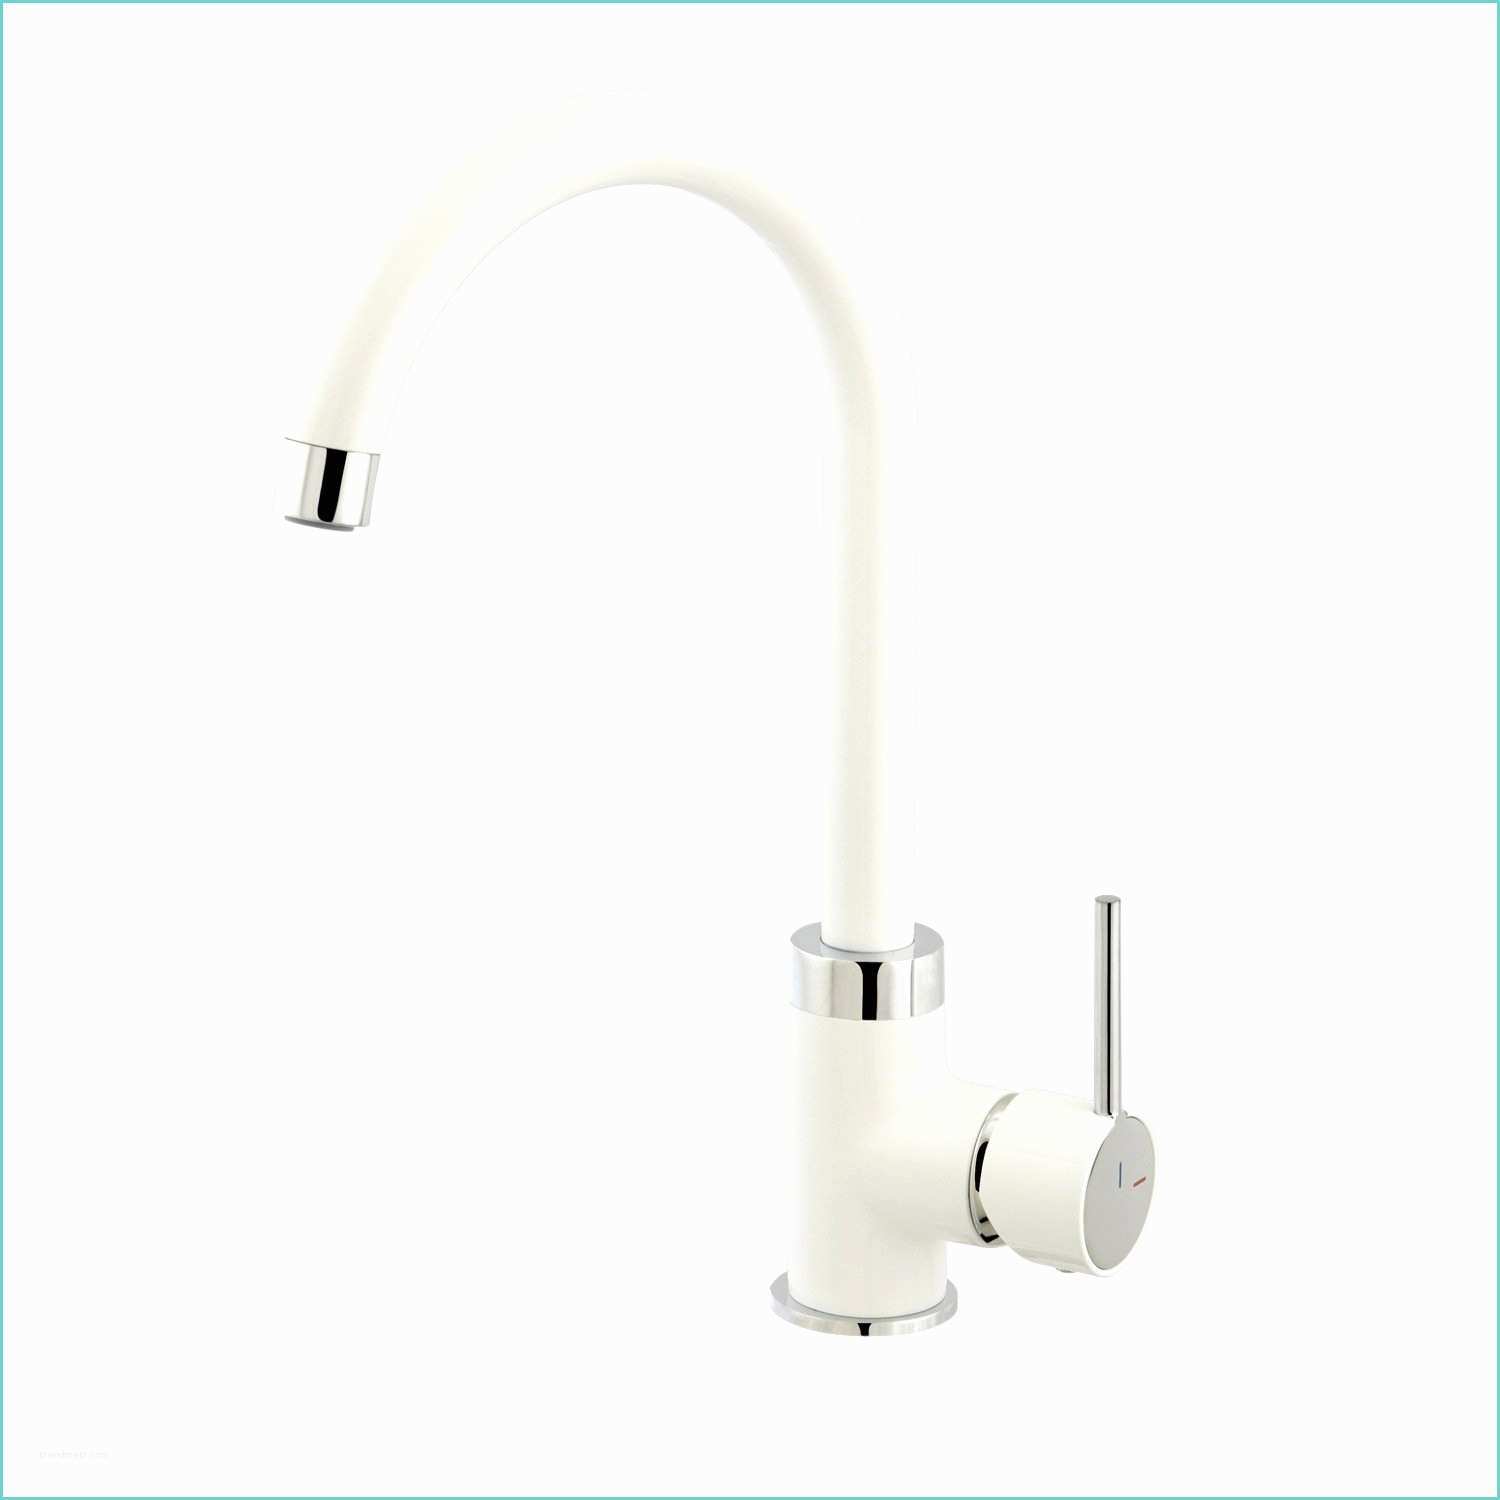 Robinet Baignoire Grohe Leroy Merlin Grohe Mitigeur Douche top Robinet Grohe Avec Mitigeur